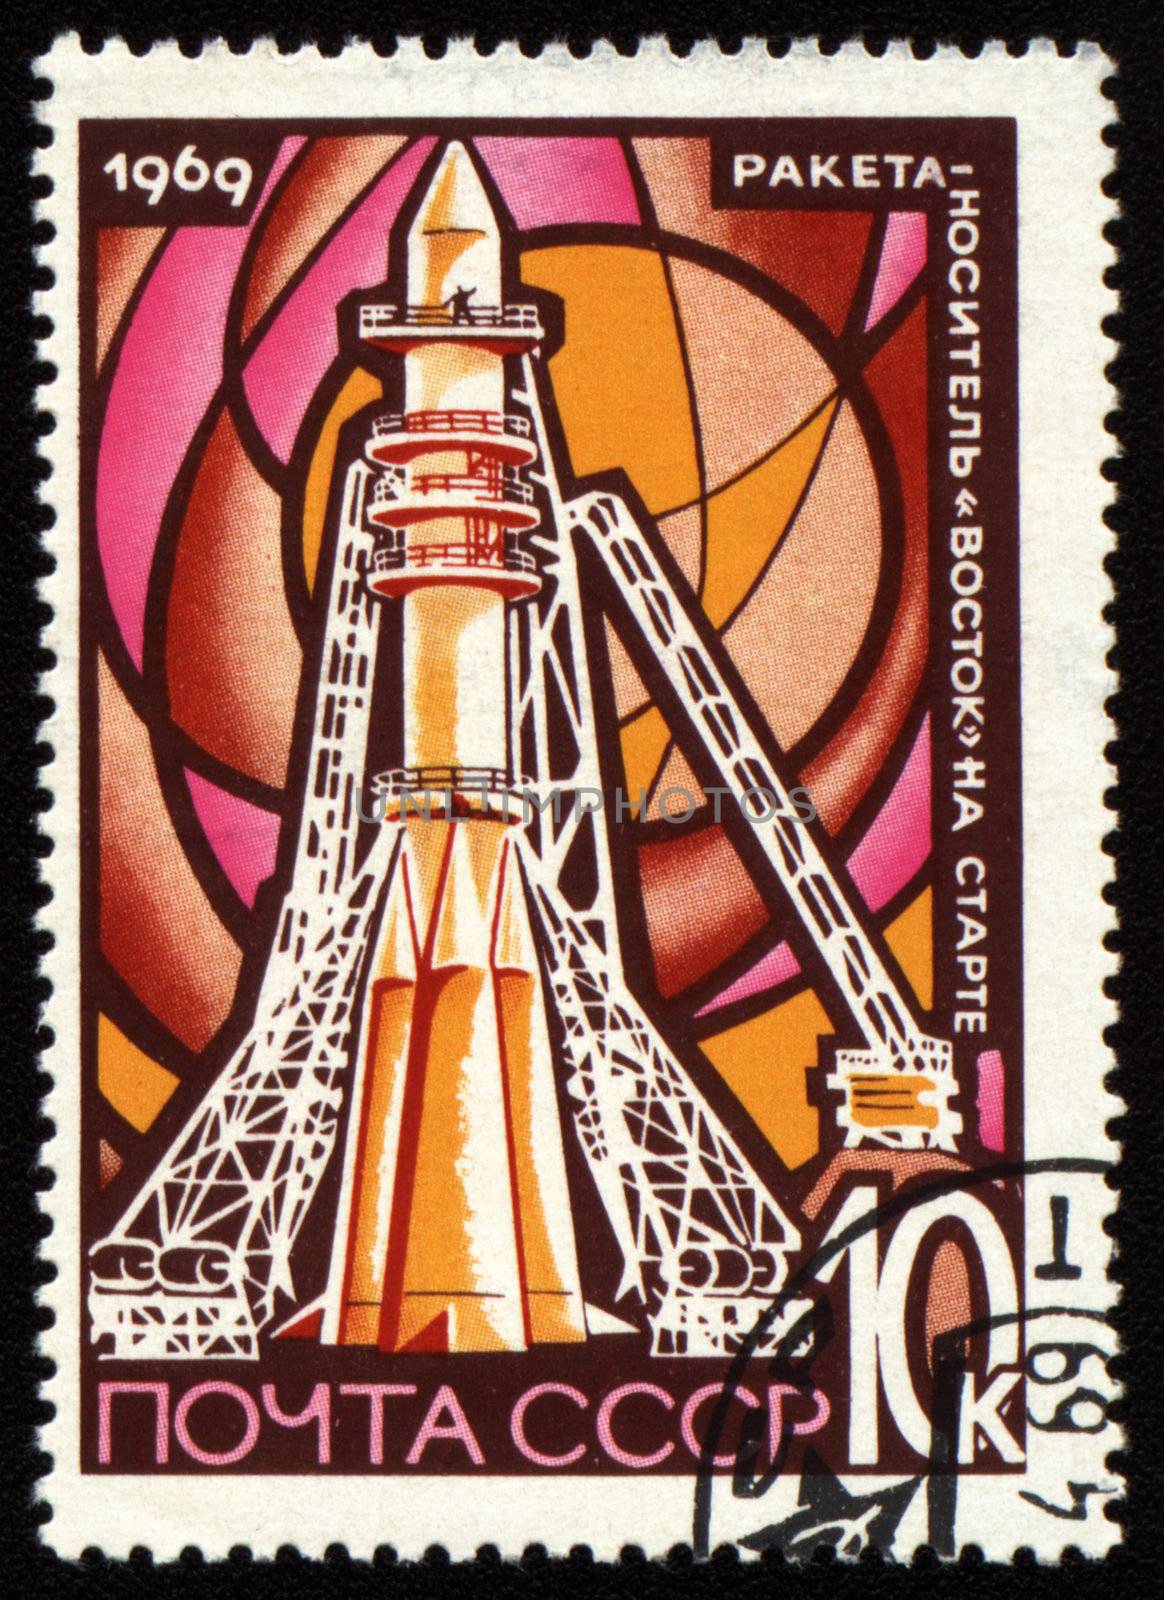 Post stamp with space rocket Vostok on launch pad by wander